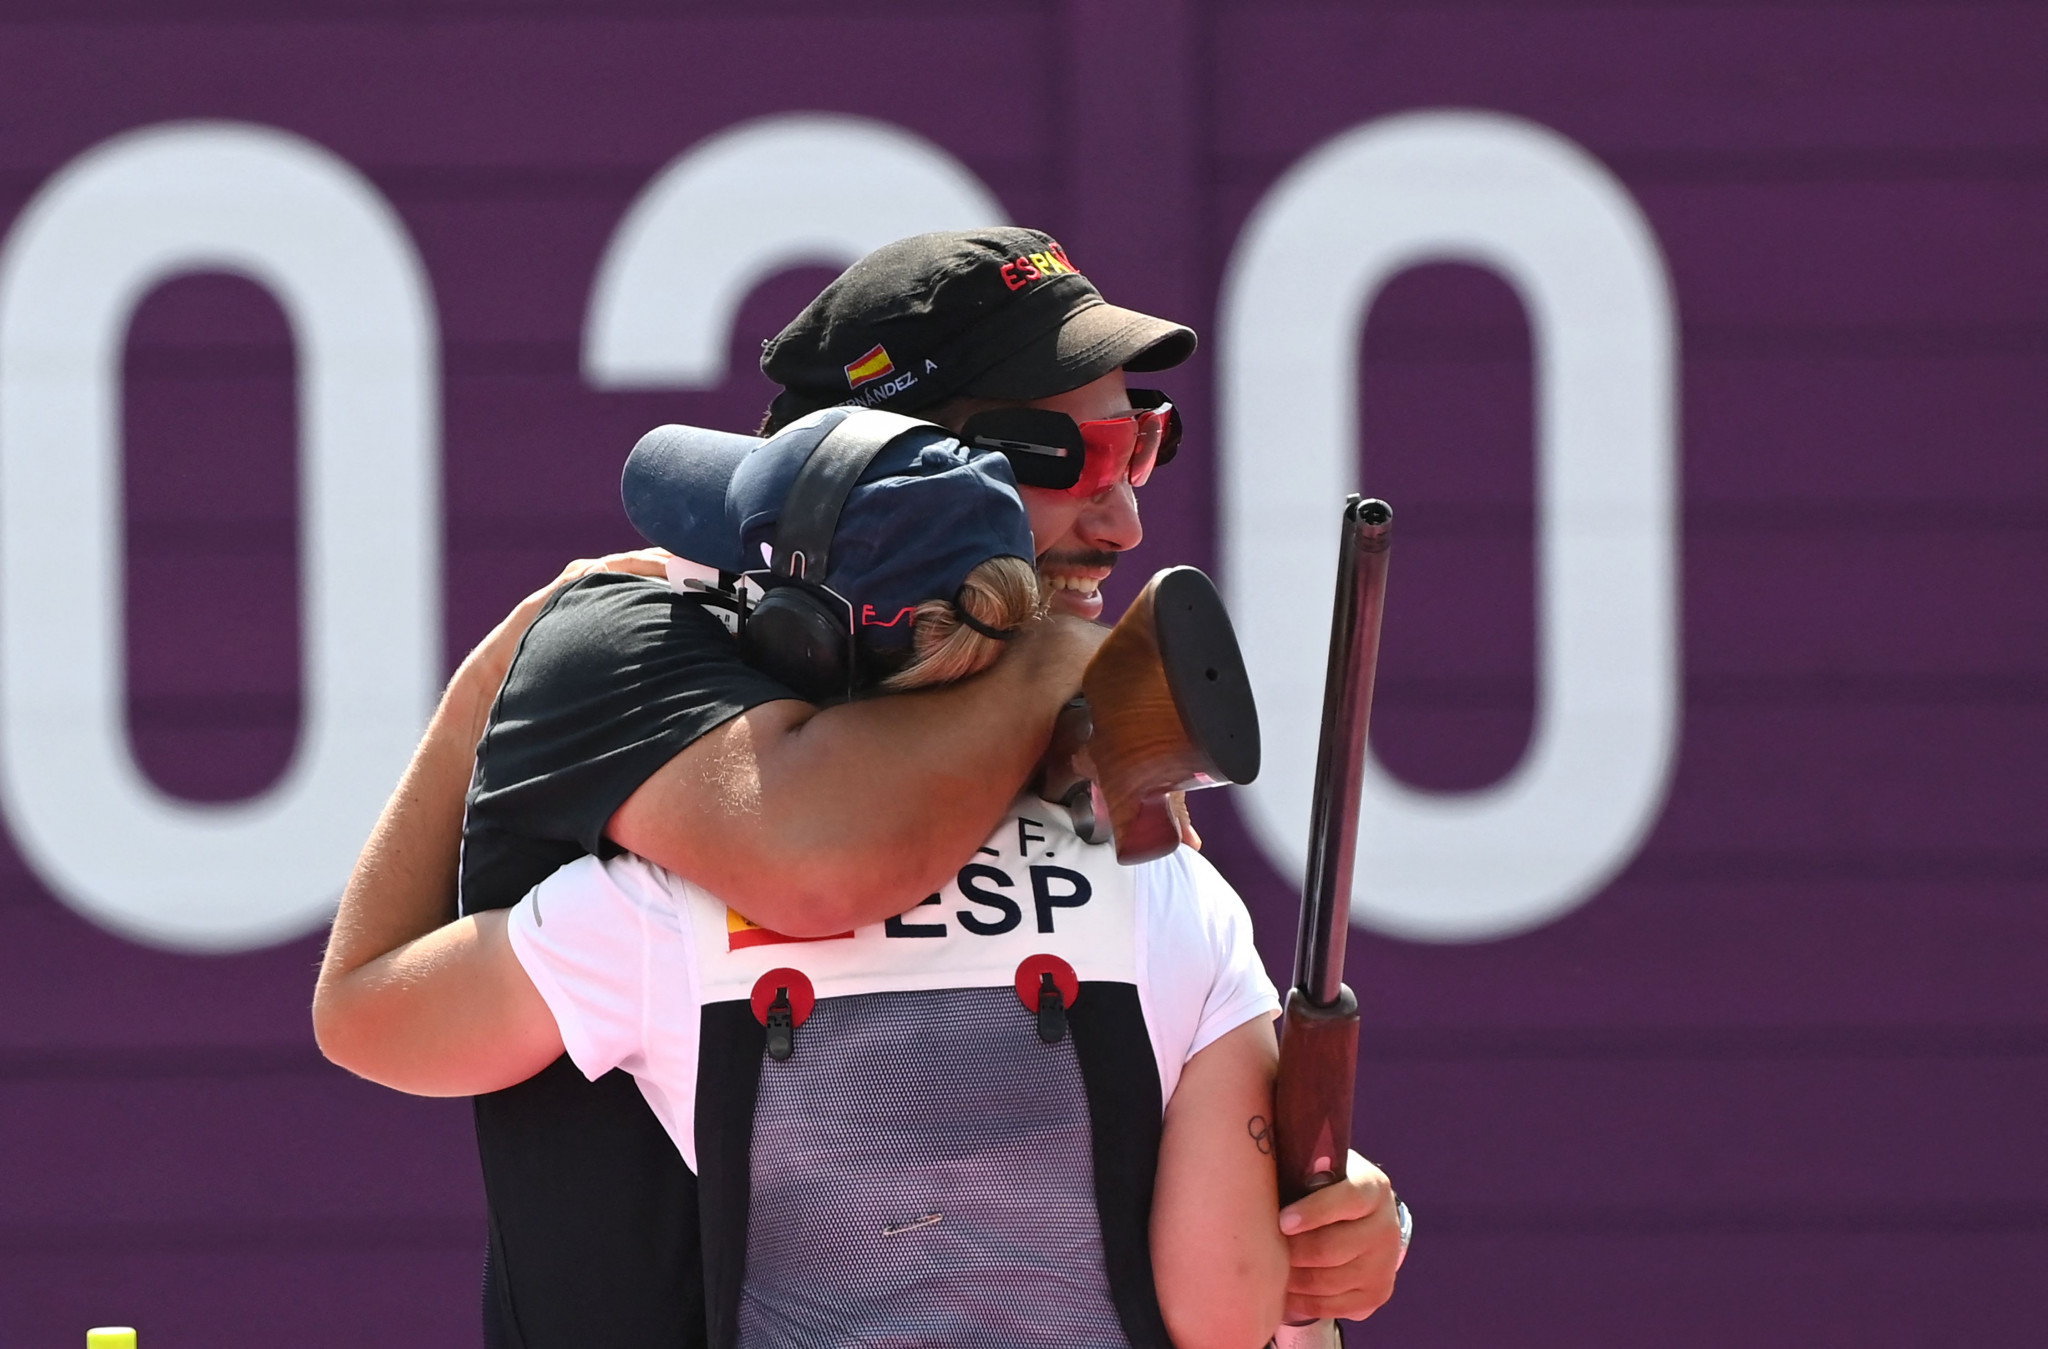 Spain's Alberto Fernandez and Fatima Galvez took the gold medal in the mixed team trap ©Getty Images